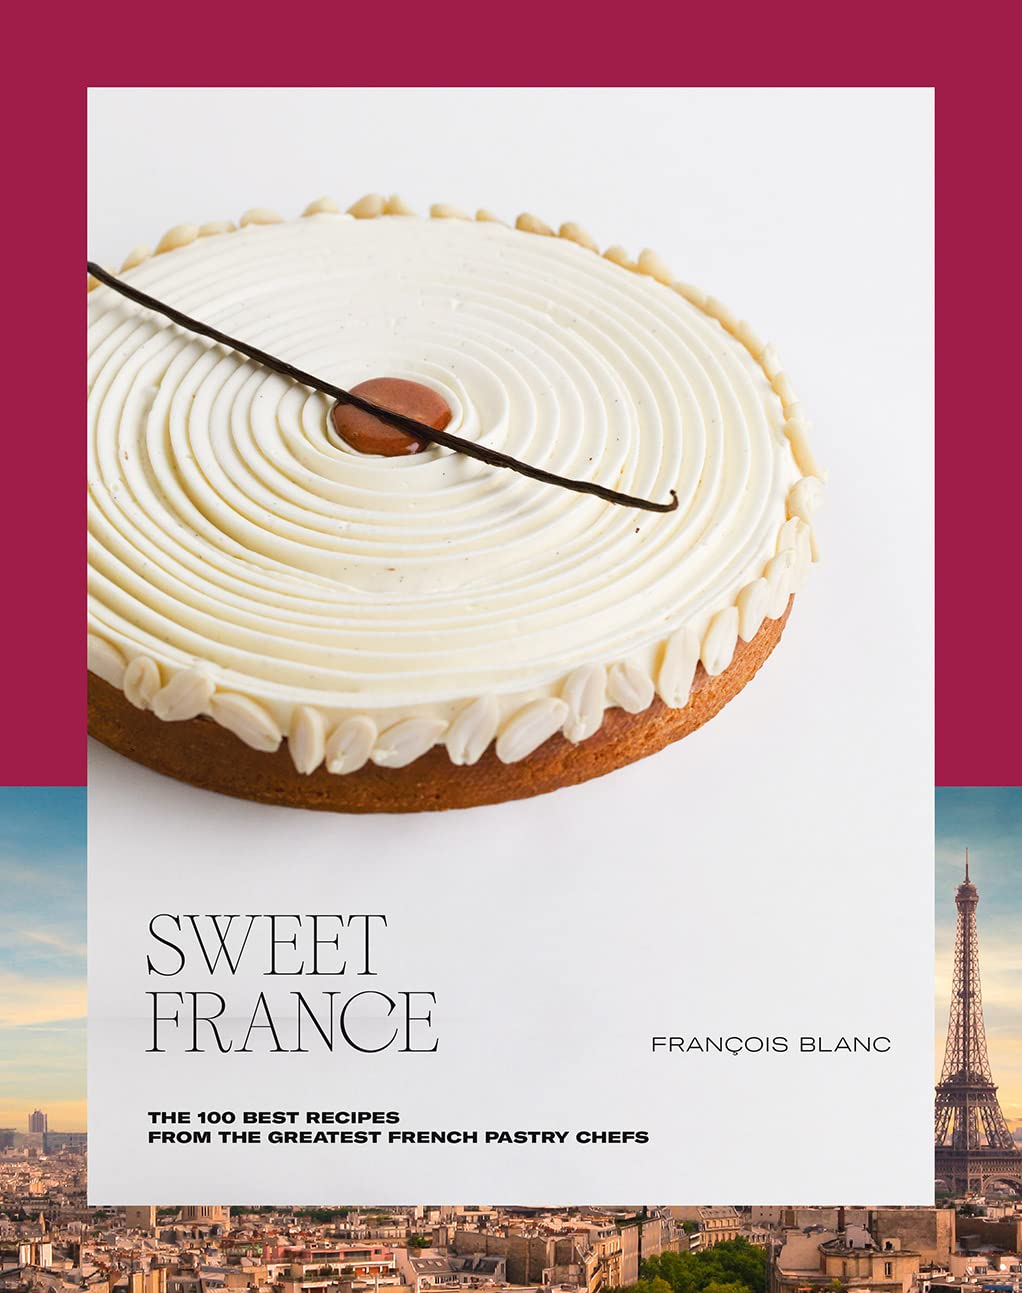 Sweet France: The 100 Best Recipes from the Greatest French Pastry Chefs (François Blanc)